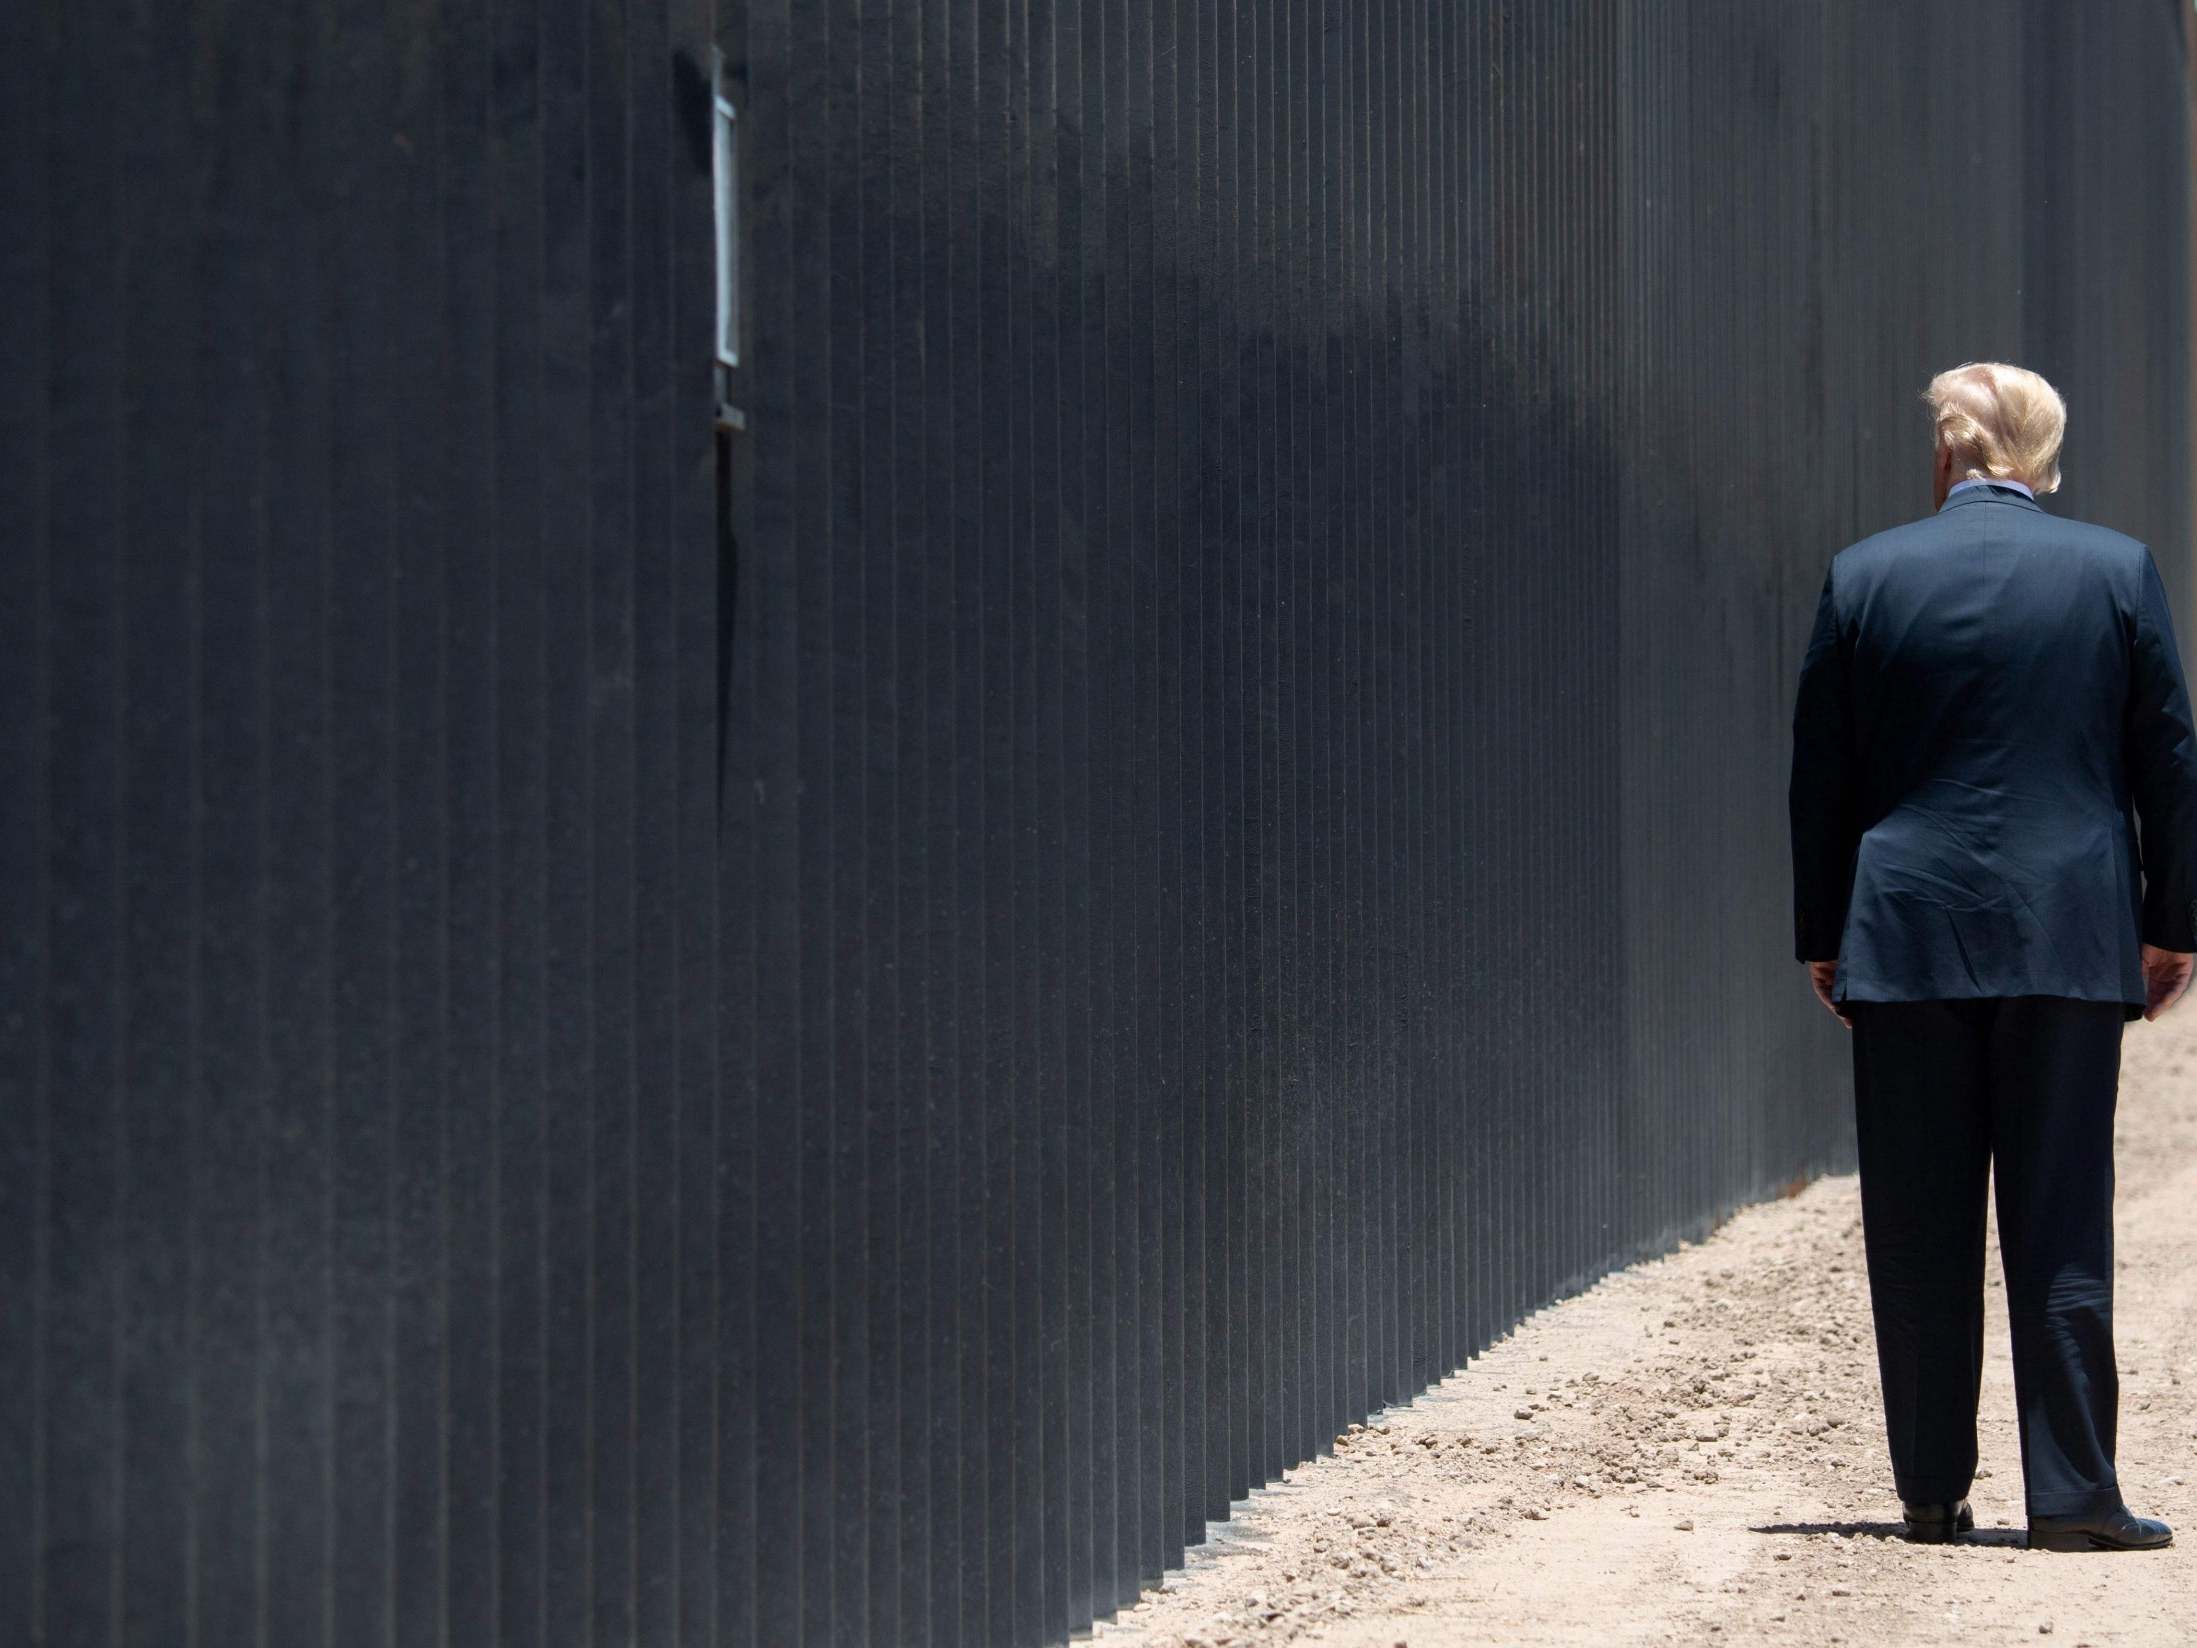 The 'big, beautiful' Mexican border wall could cause tensions between the two leaders